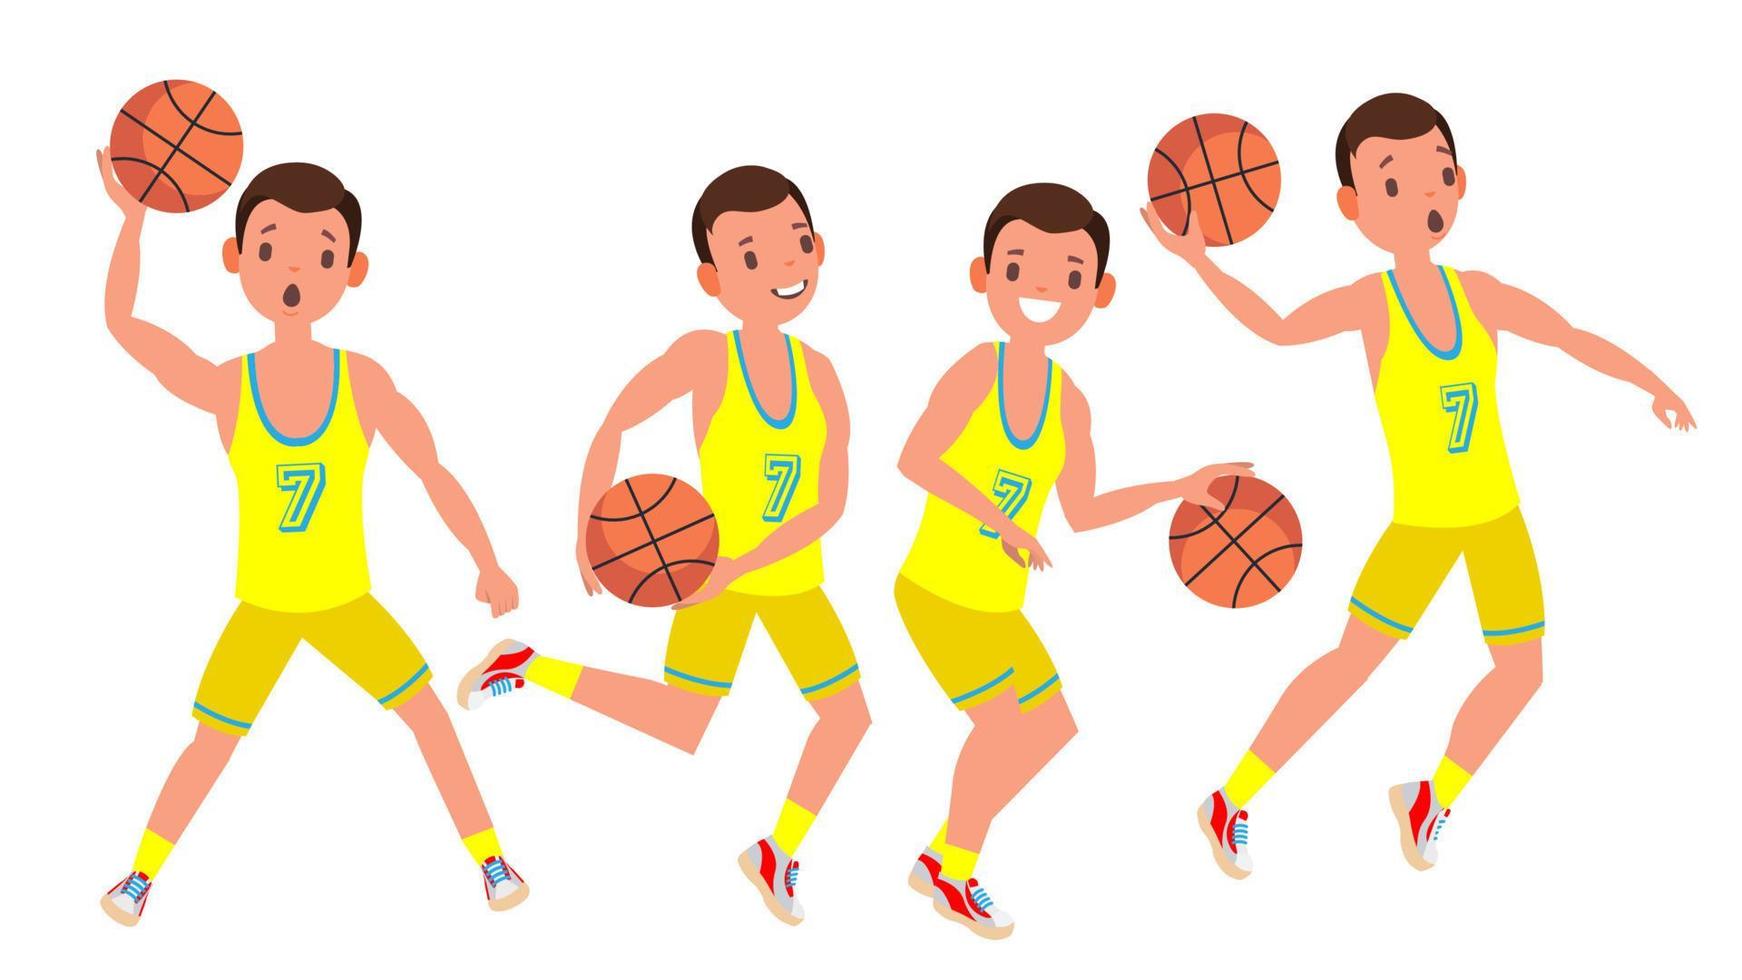 Modern Basketball Player Man Vector. Sports Concept. Running Jump With Ball. Sport Game Competition. Isolated On White Cartoon Character Illustration vector